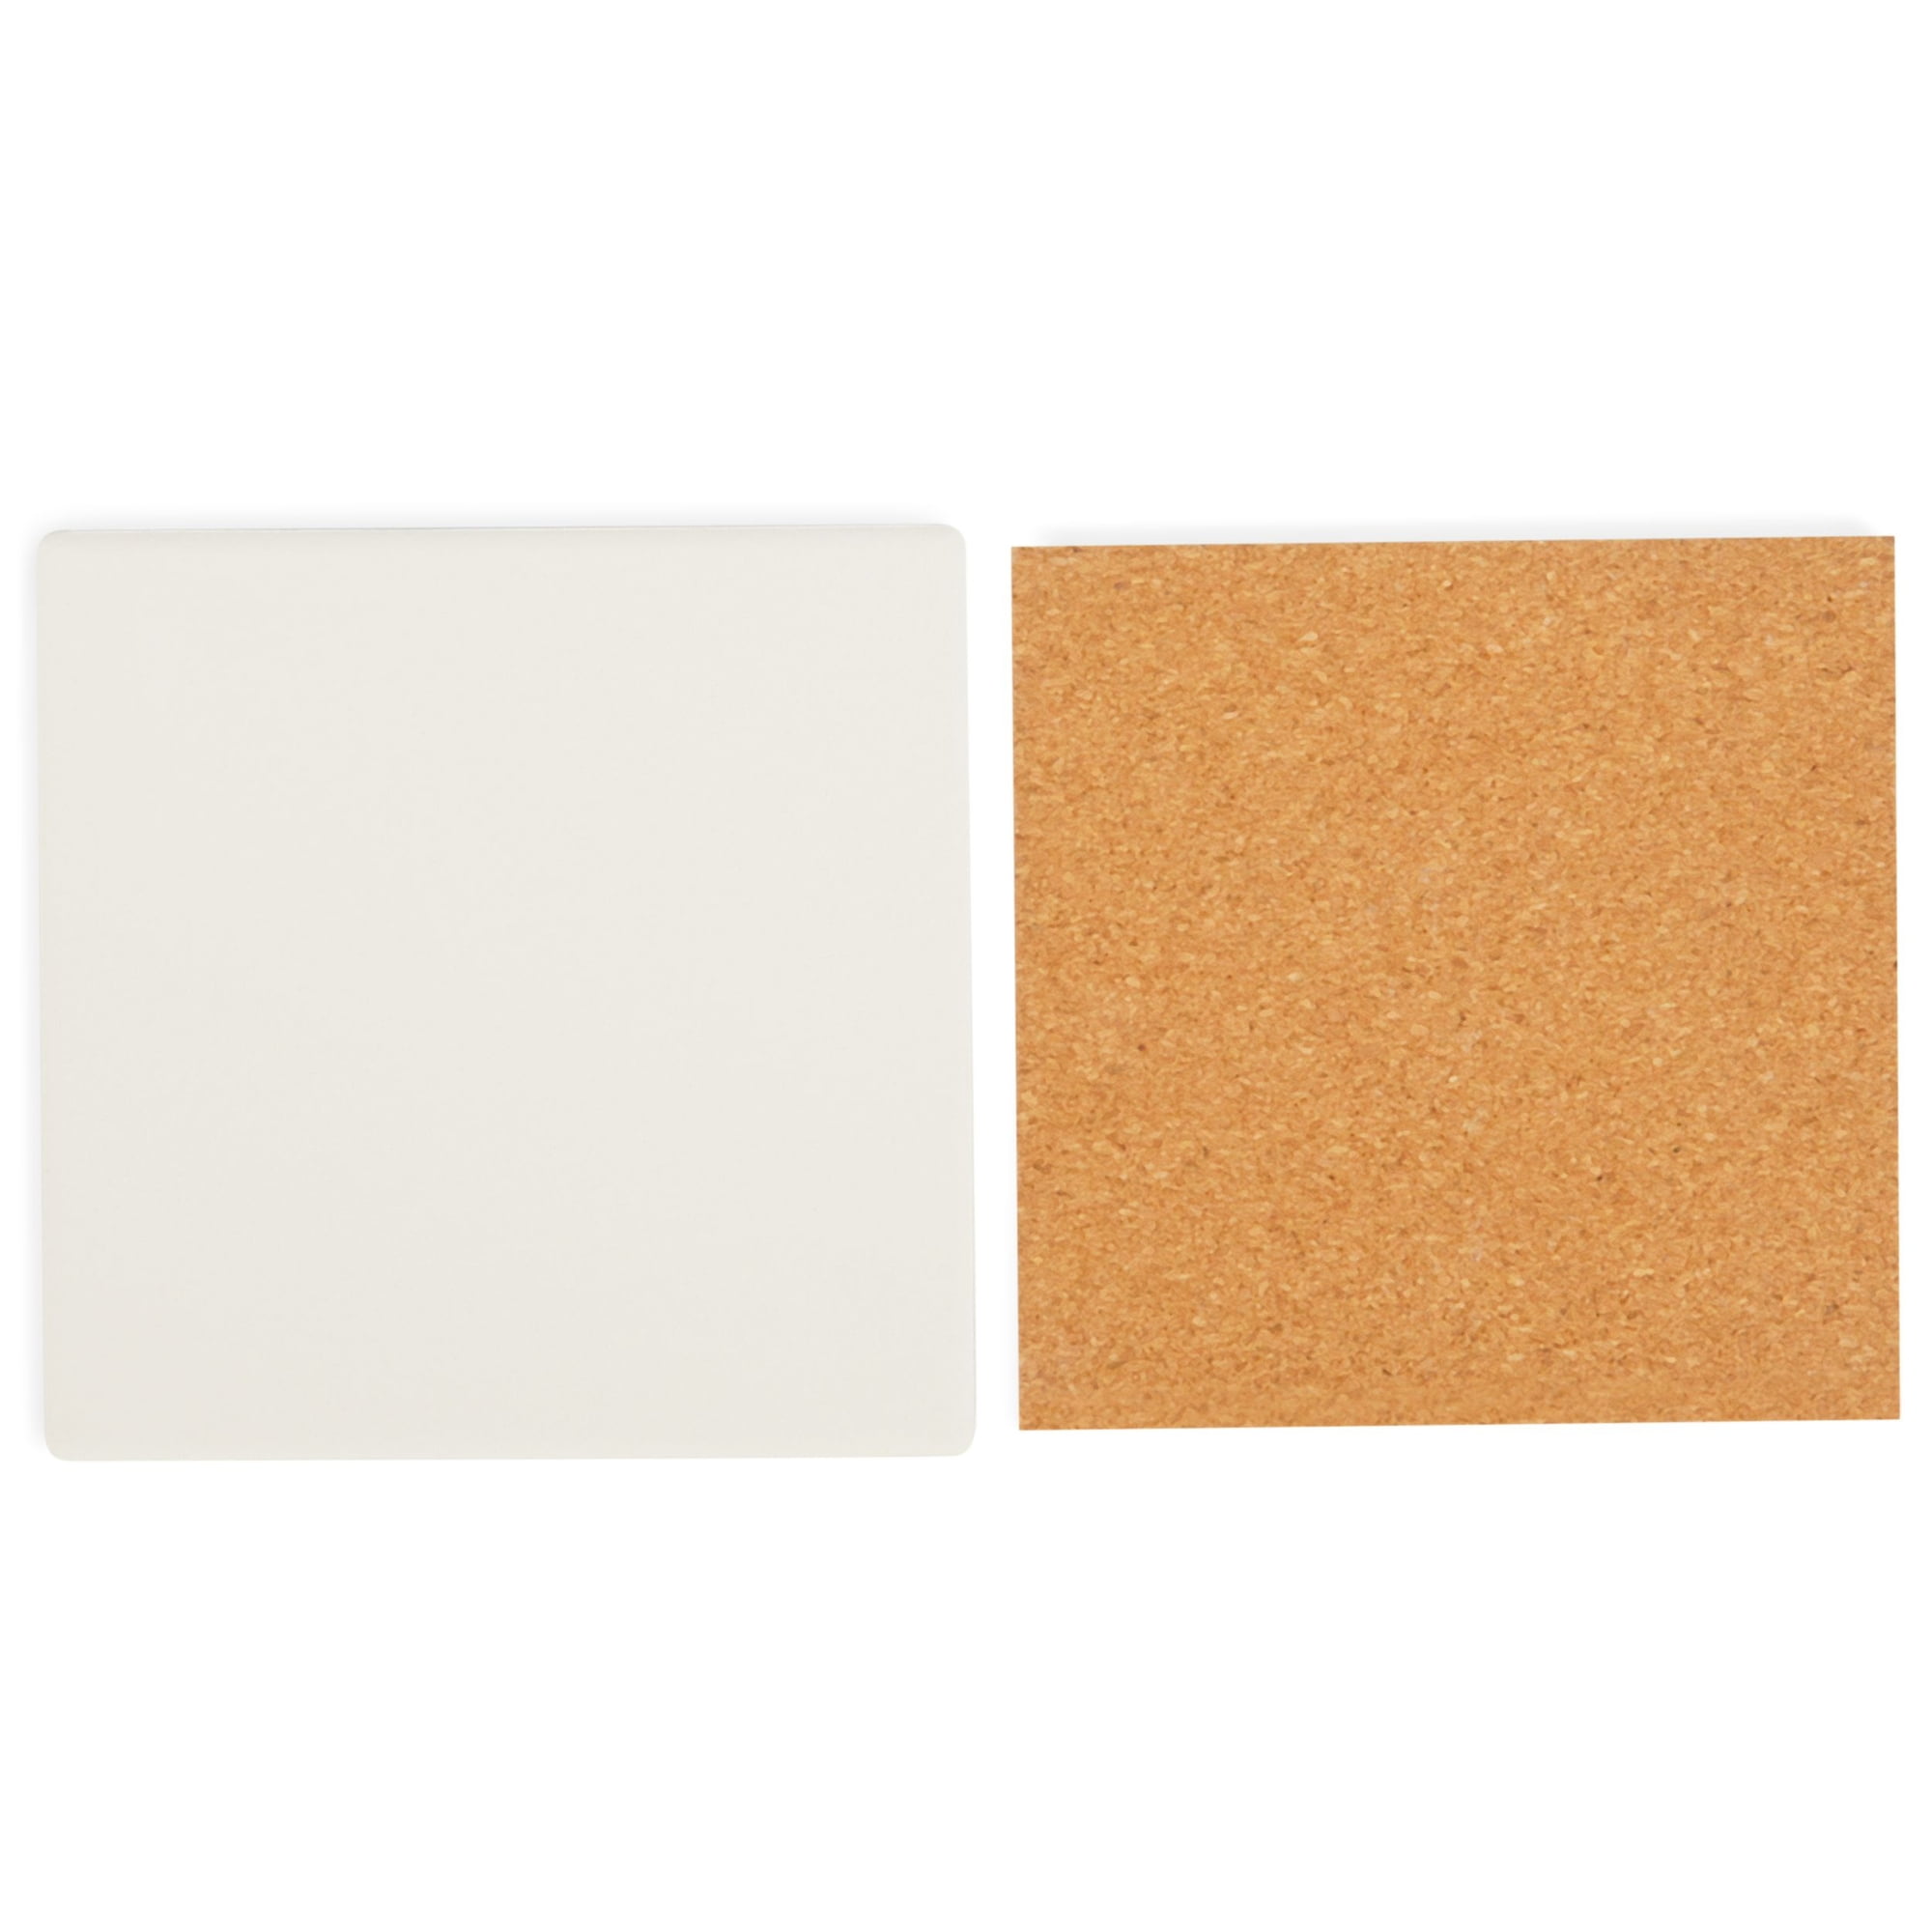 Bright Creations 12 Pack Blank Ceramic Tiles for Crafts, DIY Coasters, Unglazed (White, 4.25 in)